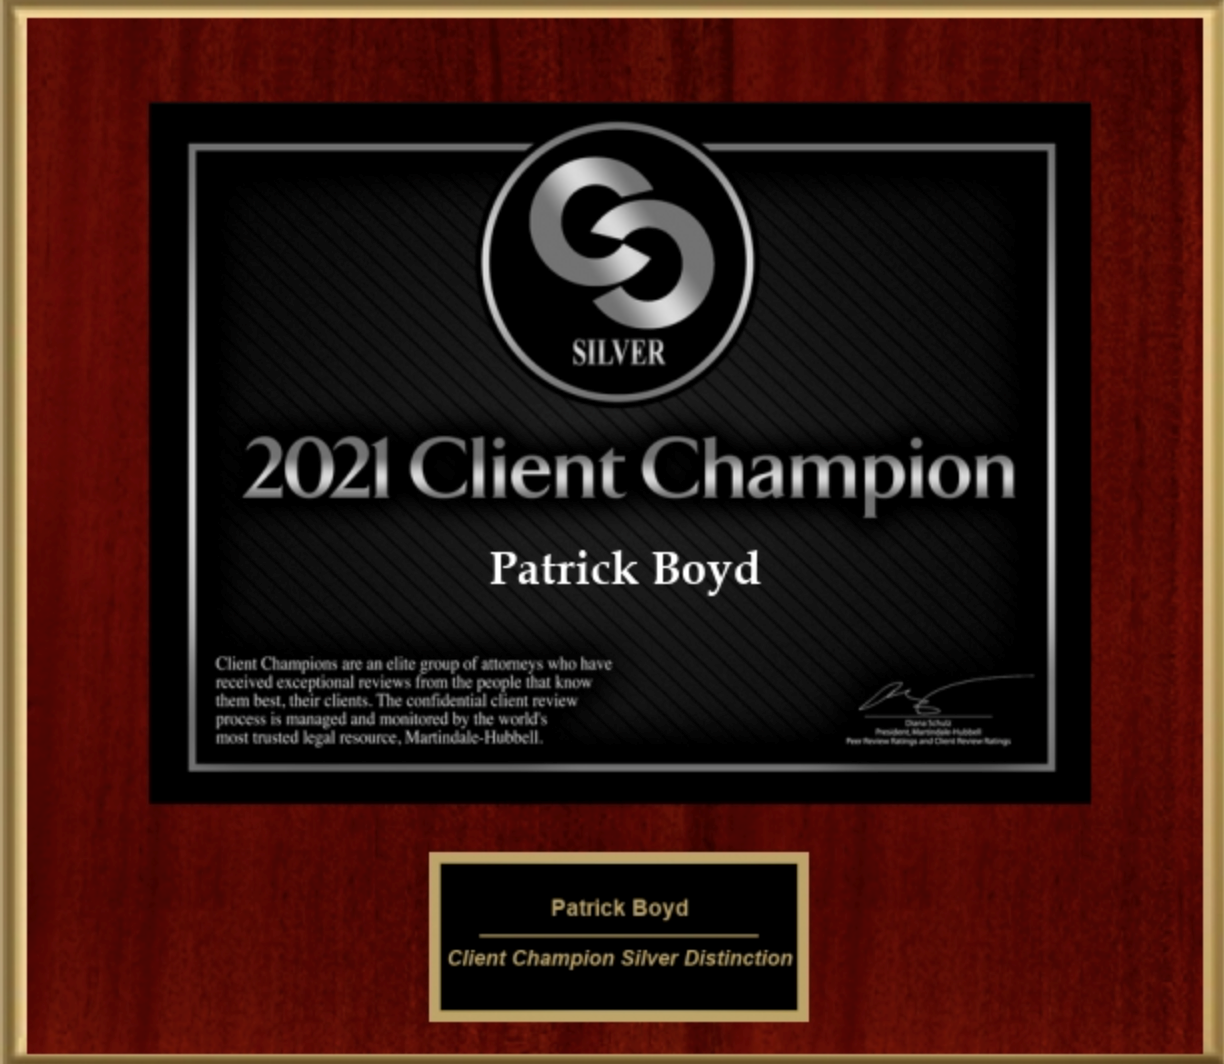 Silver Martindale-Hubbell Client Champion Award: Patrick J. Boyd - 2021